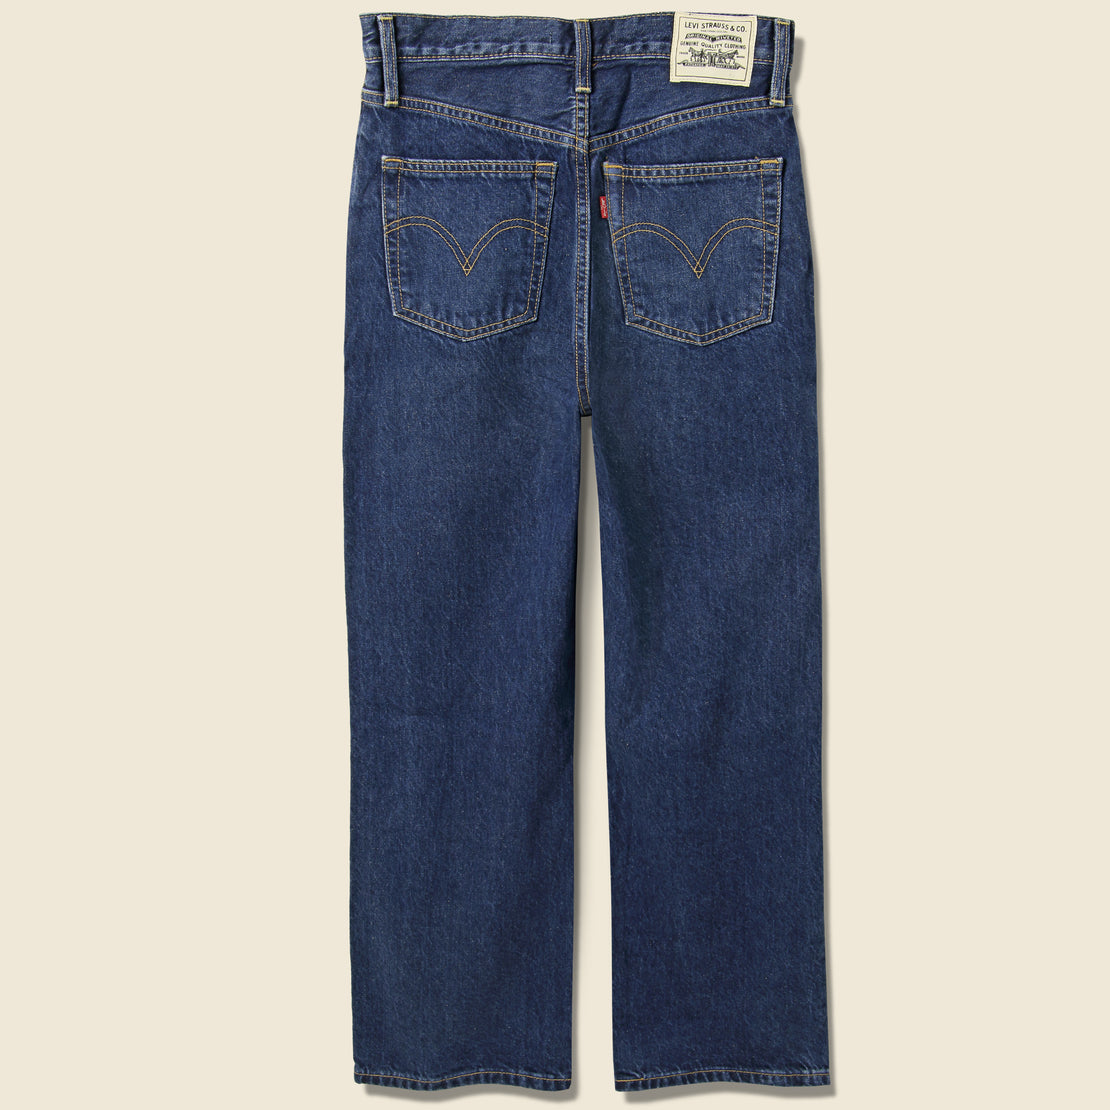 Ribcage Straight Ankle Jean - Ground Swell